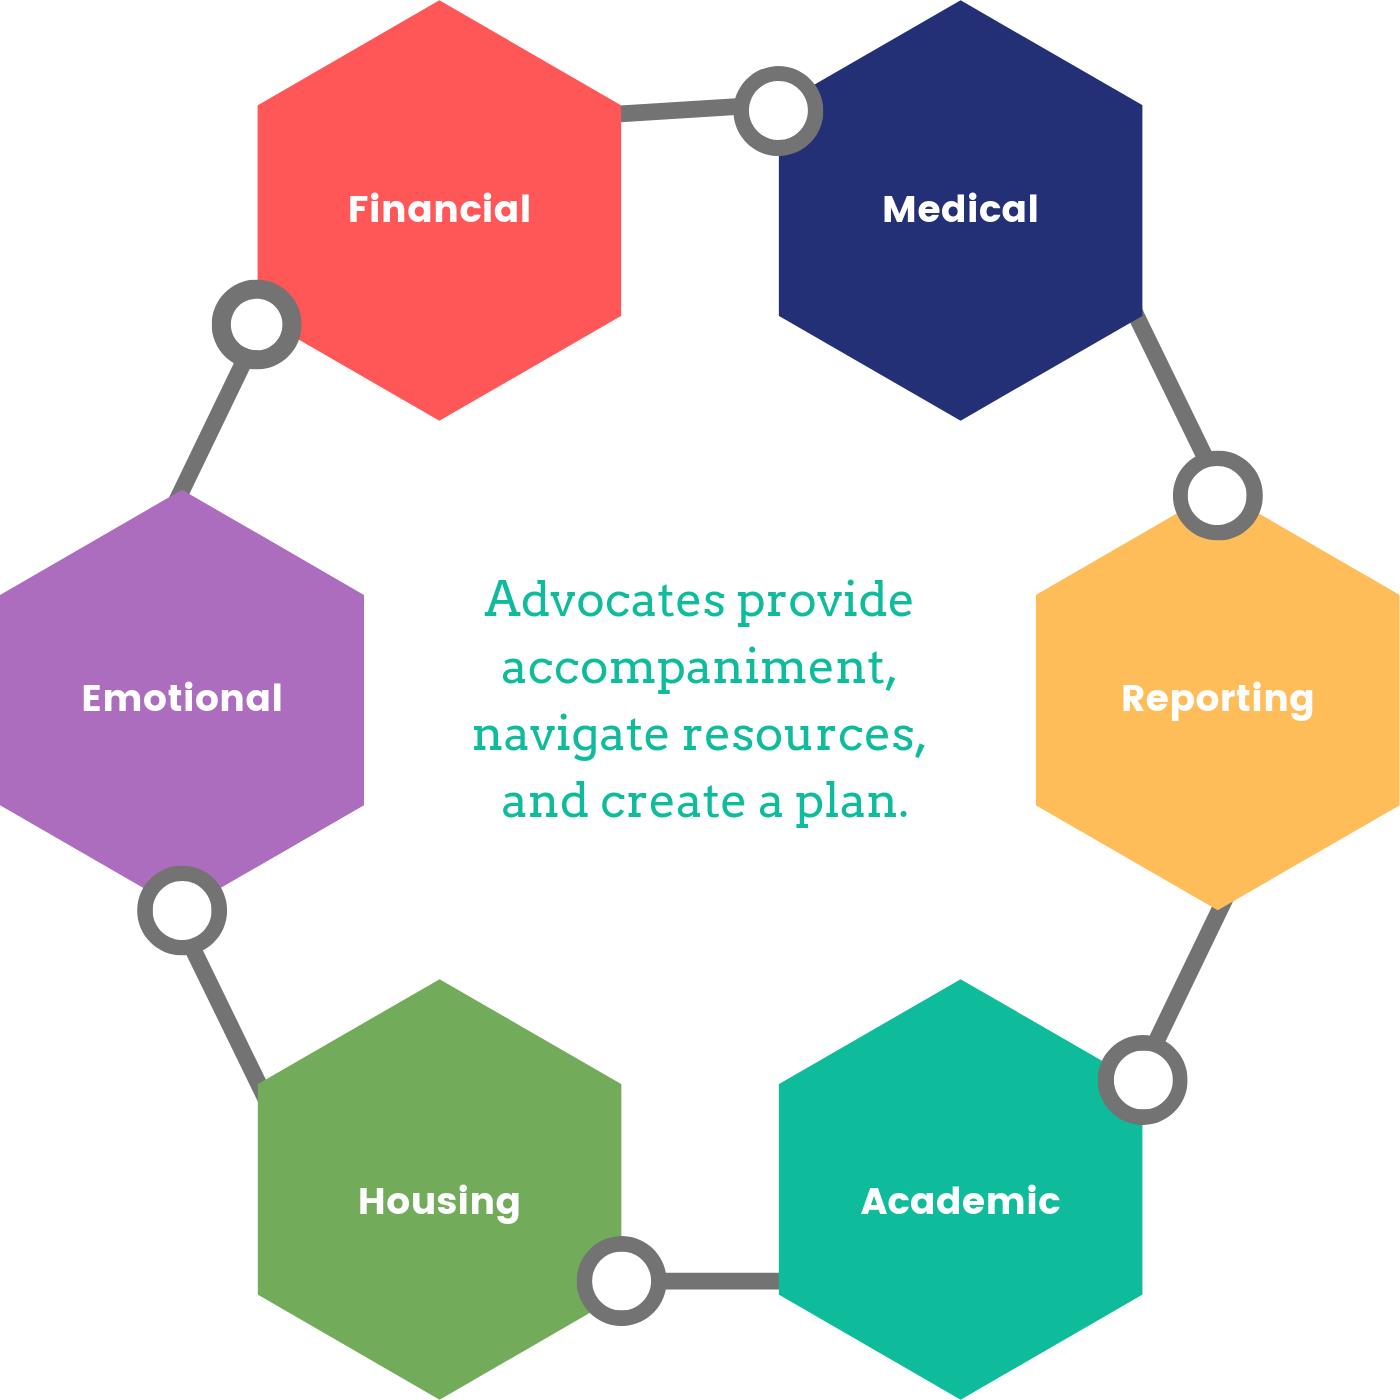 Advocates provide accompaniment, navigate resources, and create a plan, covering Financial, Medical, Emotional, Reporting, Housing, and Academic needs.